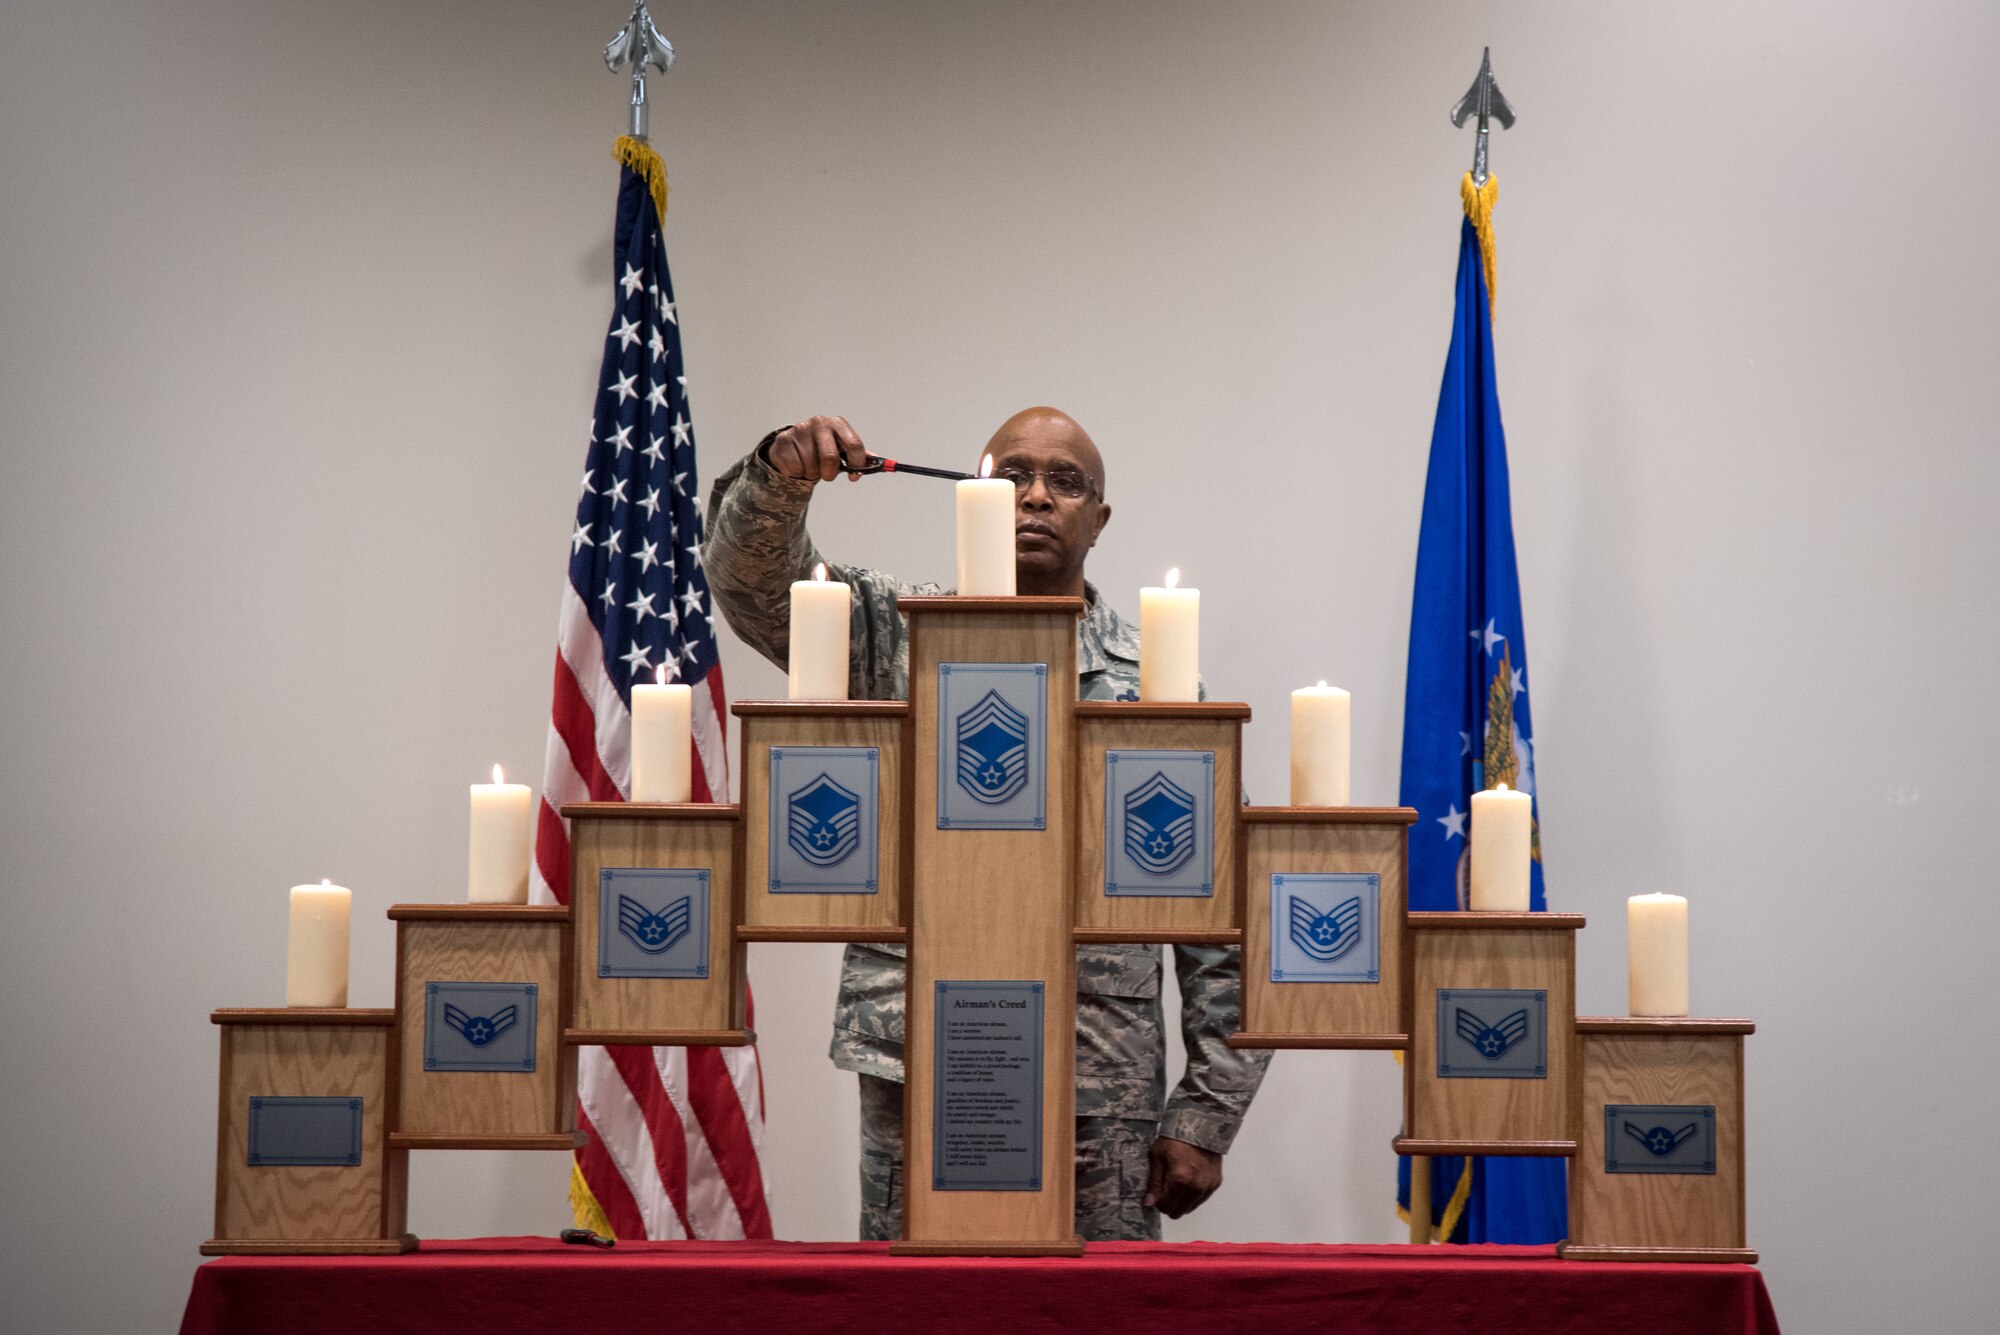 Chief Master Sgt. Marshall Harris, 403rd Maintenance Group quality assurance chief, lights the final ceremonial candle during the Noncommissioned Officer and Senior Noncommissioned Officer Induction Ceremony at Keesler Air Force Base, Mississippi February 10, 2019.  This induction ceremony recognizes Airmen rising in the ranks and the responsibilities of these new leaders and mentors in the U.S. Air Force Reserve. (U.S. Air Force photo by Staff Sgt. Shelton Sherrill)